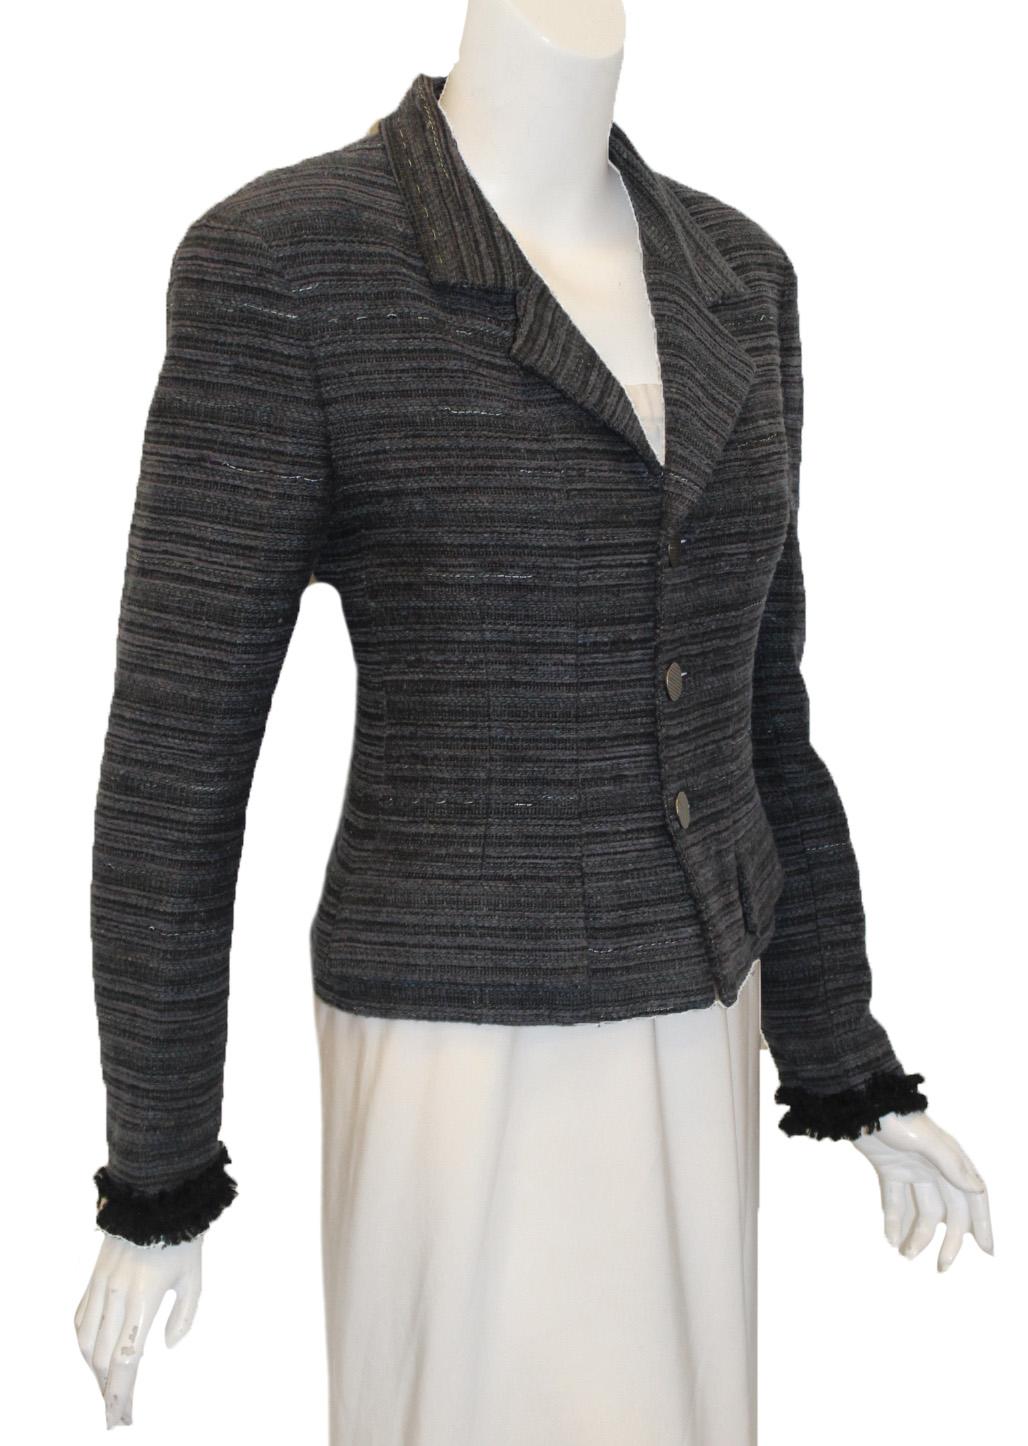 Chanel vintage blue and grey tweed wool blend  jacket from the fall 1999 collection incorporates 3 silver tone Chanel buttons for closure at front.  This jacket with notch collar and long sleeves with fringe on cuffs is constant with the vintage